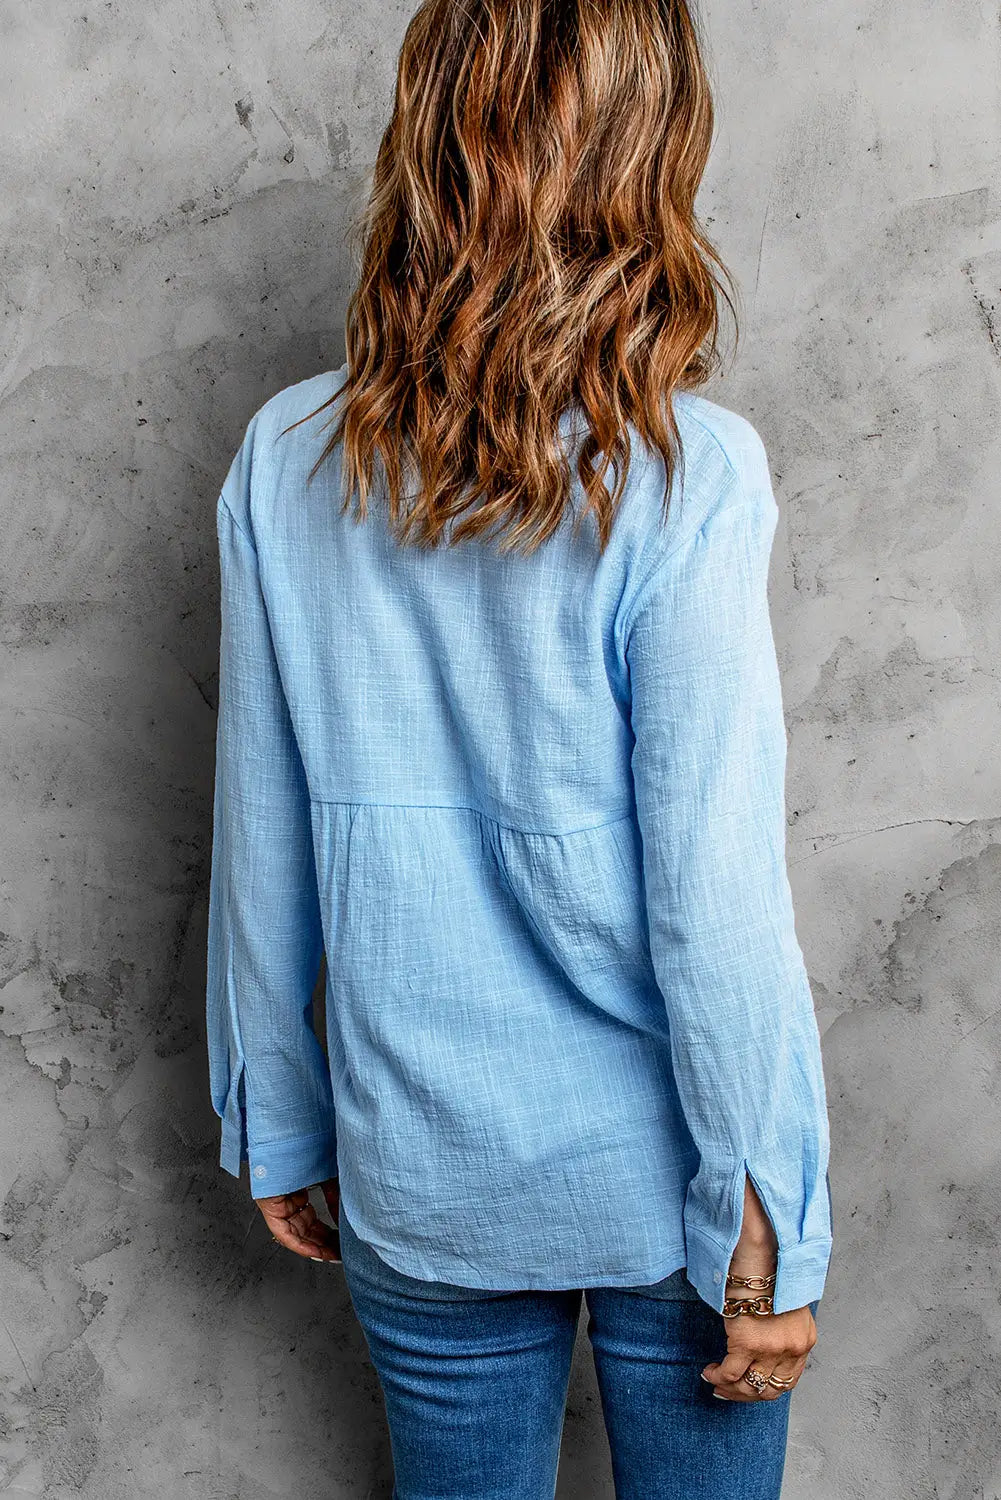 Sky blue textured solid color basic shirt - blouses & shirts